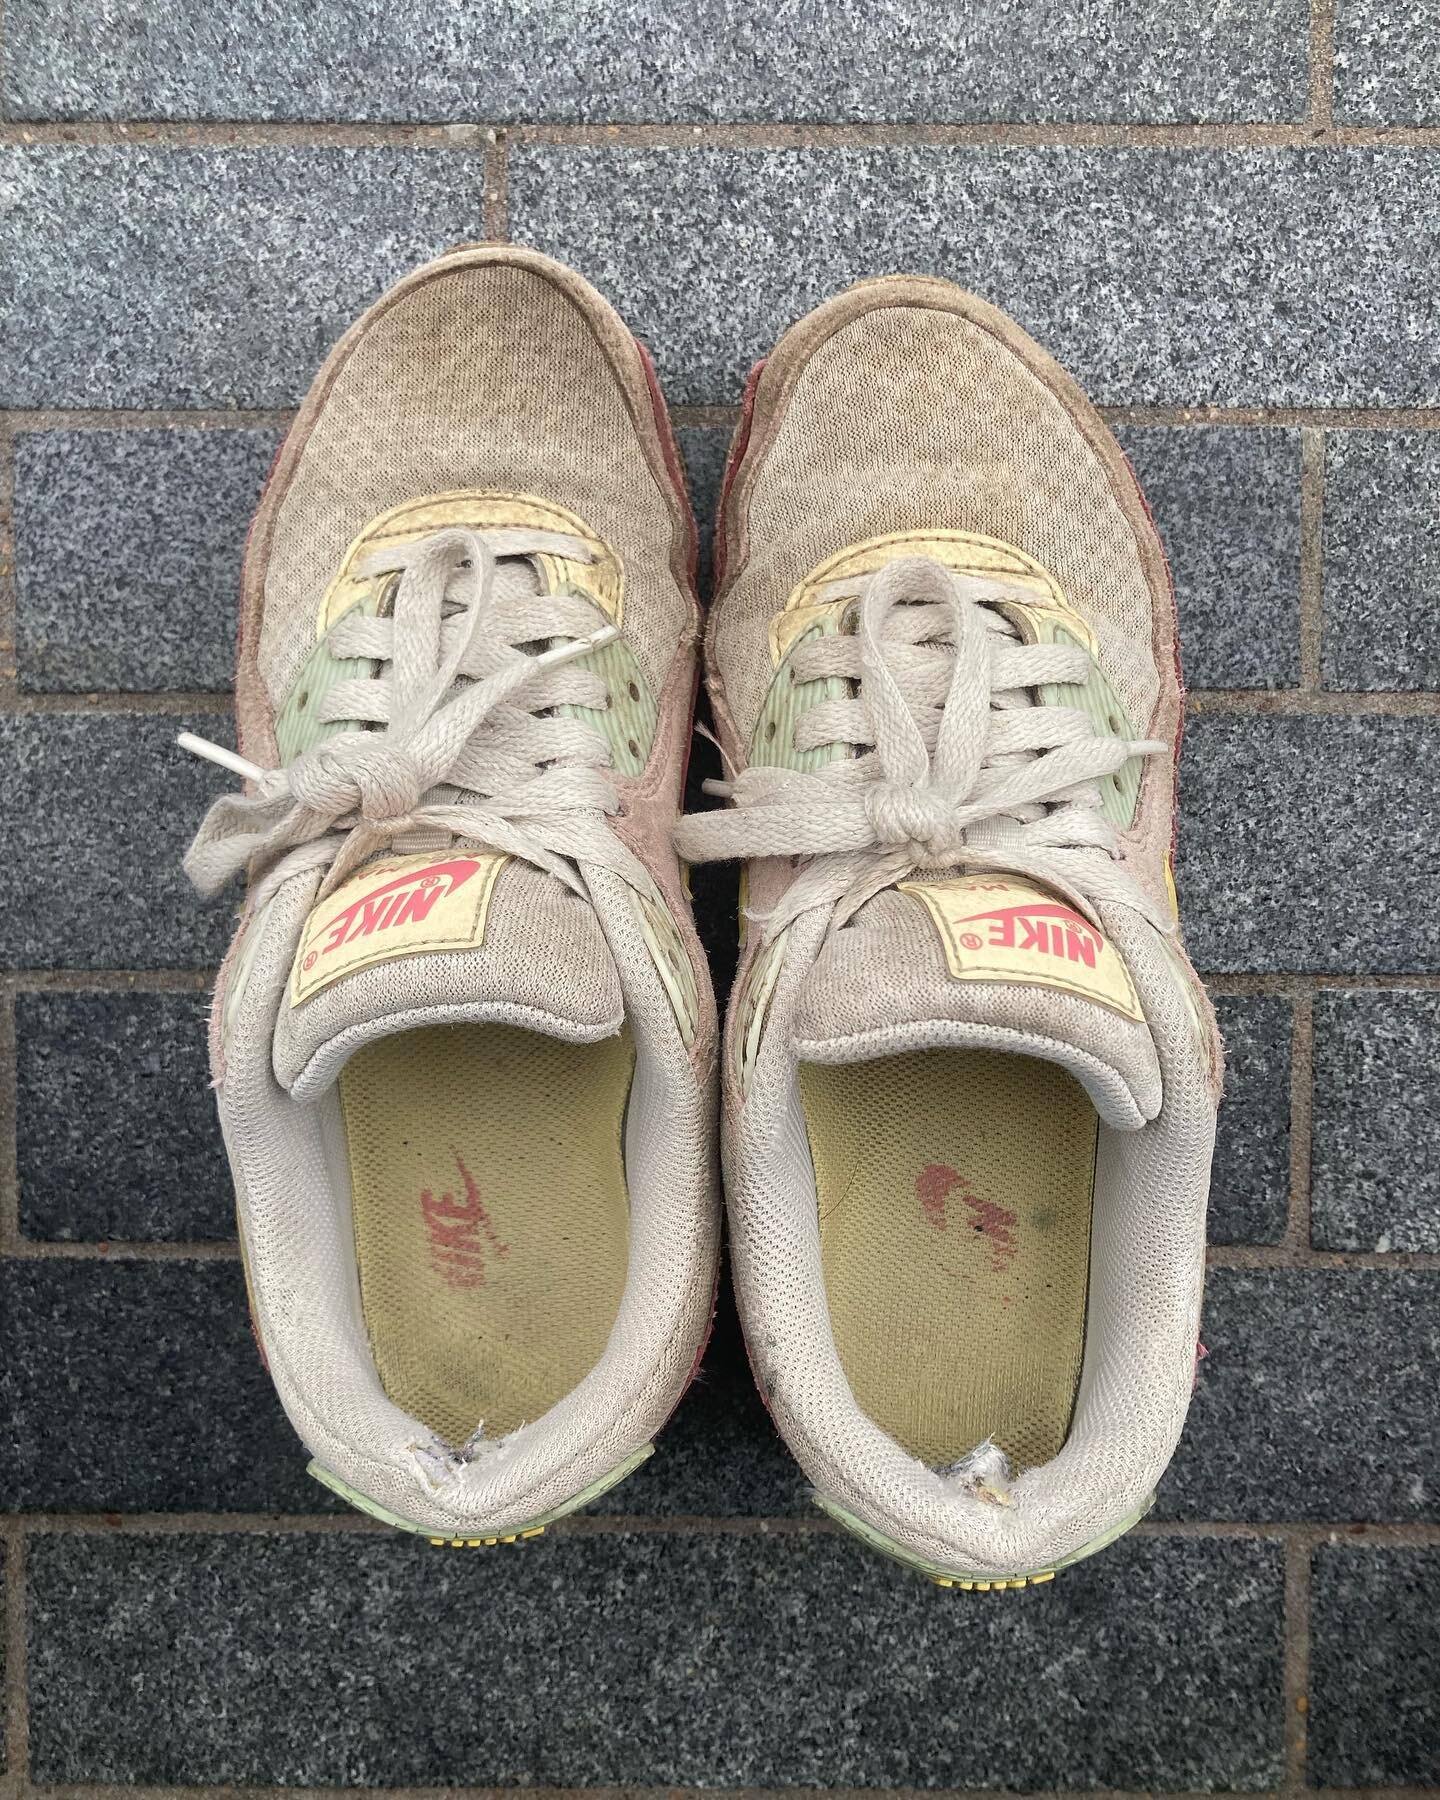 I need new shoes! Fellow walkers - hit me up with your recommendations for good, preferably sustainable footwear. I have a tendency to choose style over function and to keep my shoes way too long but am conscious I need to be looking after my feet! T